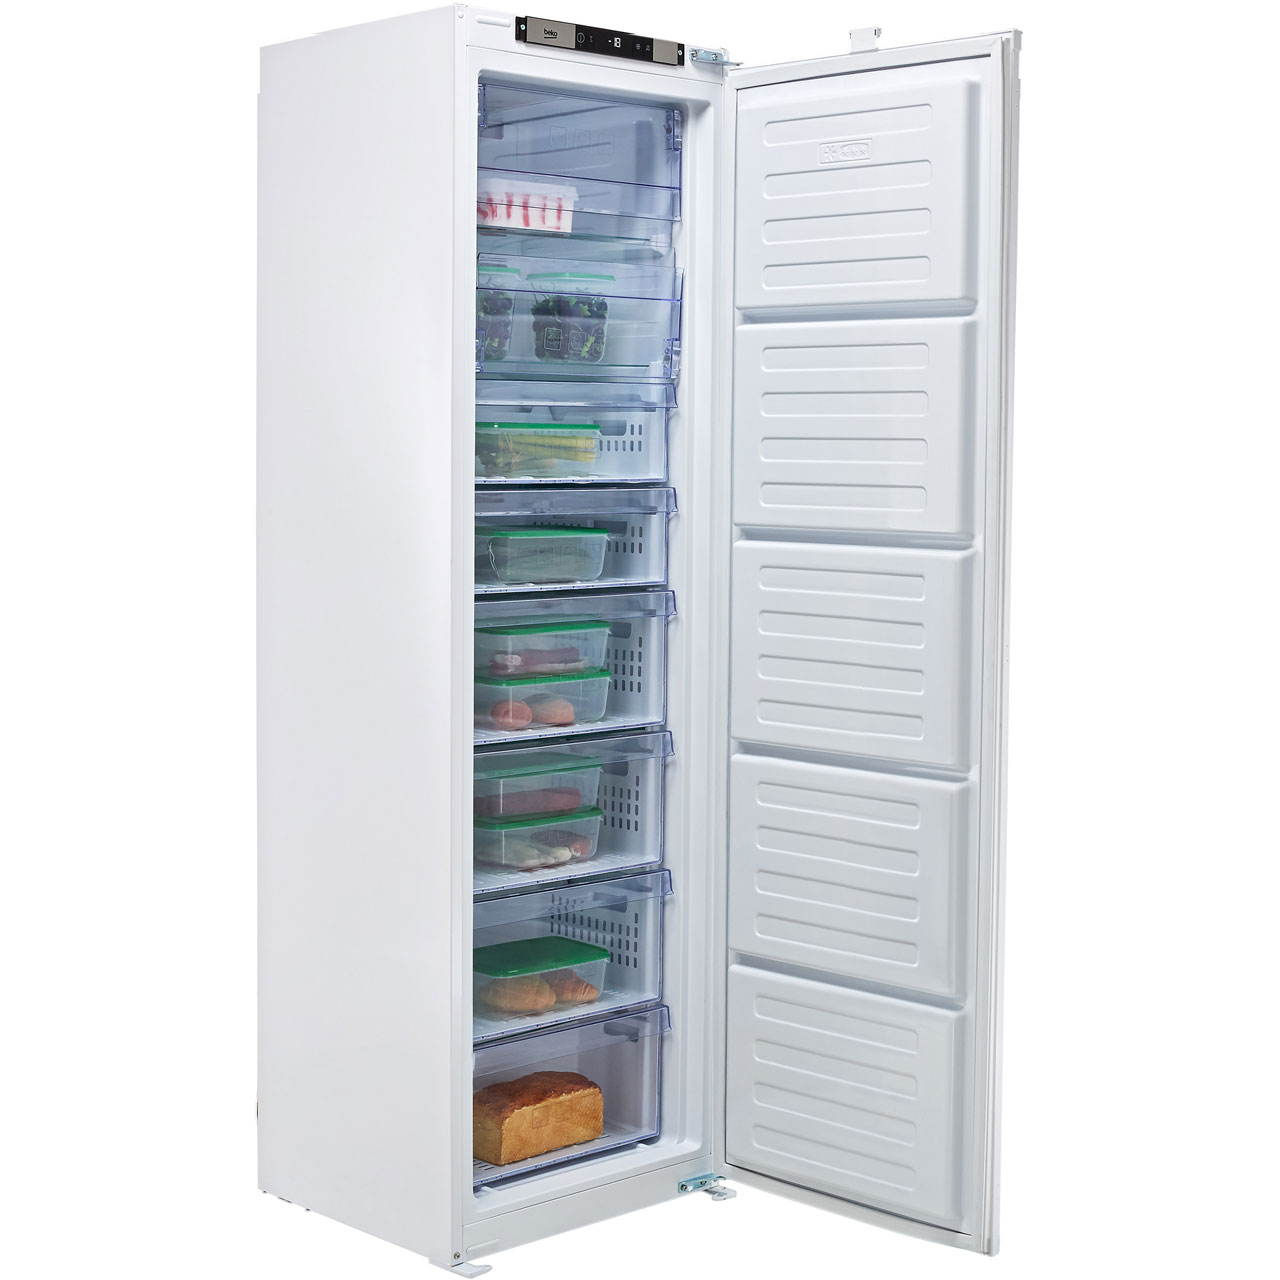 Beko BFFD1577 Built In 220 Litres A+ Upright Freezer White New from AO ...